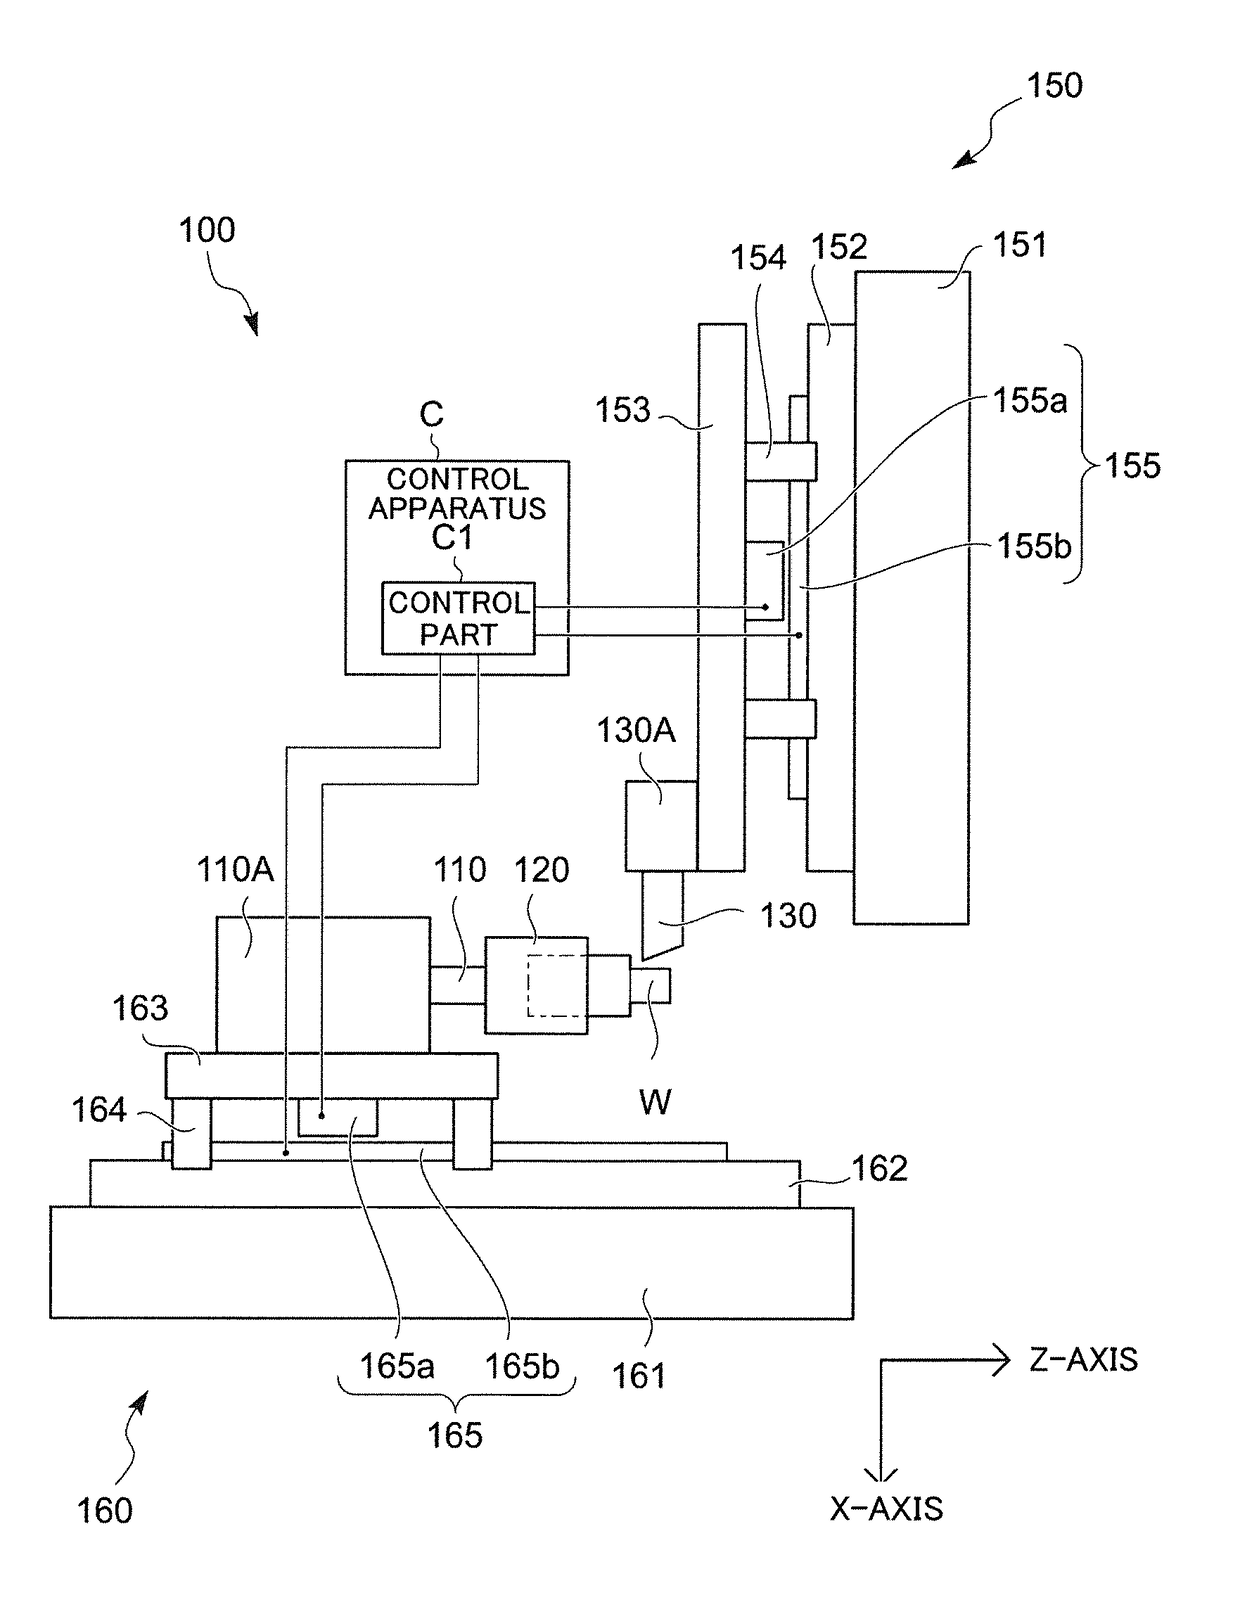 Machine tool and control apparatus of the machine tool